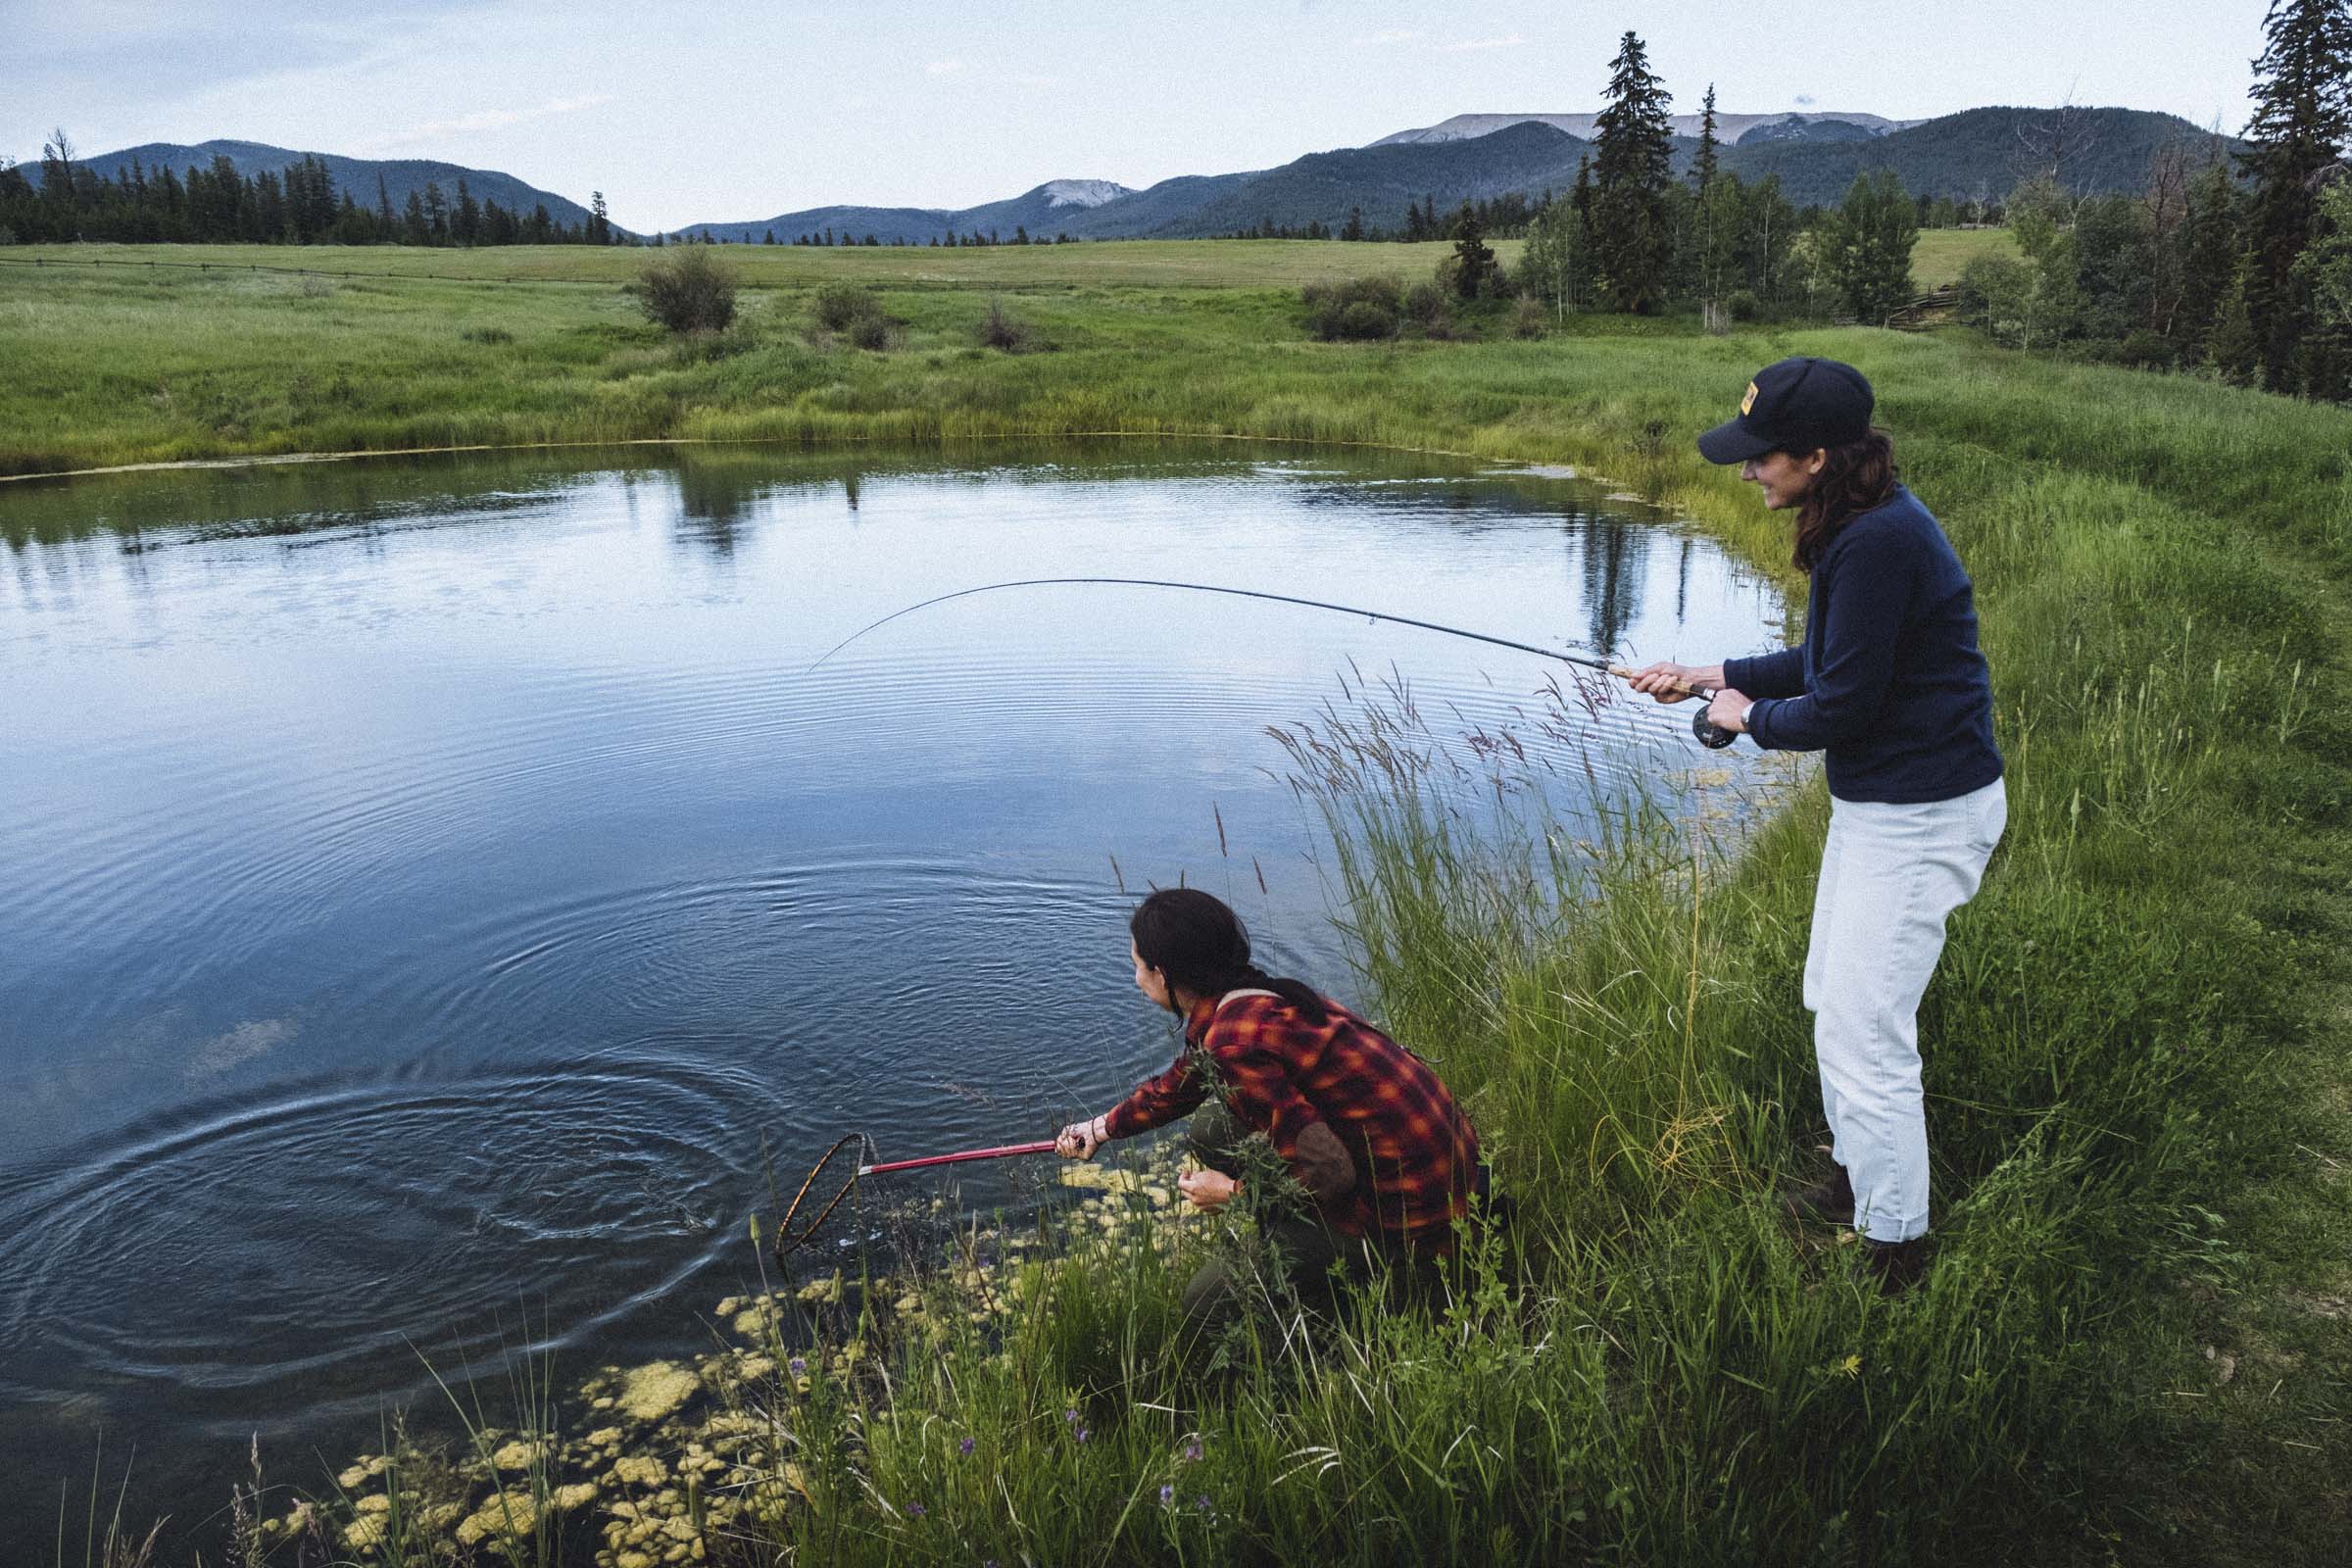 Fly fishing for trout at Echo Valley's little pond